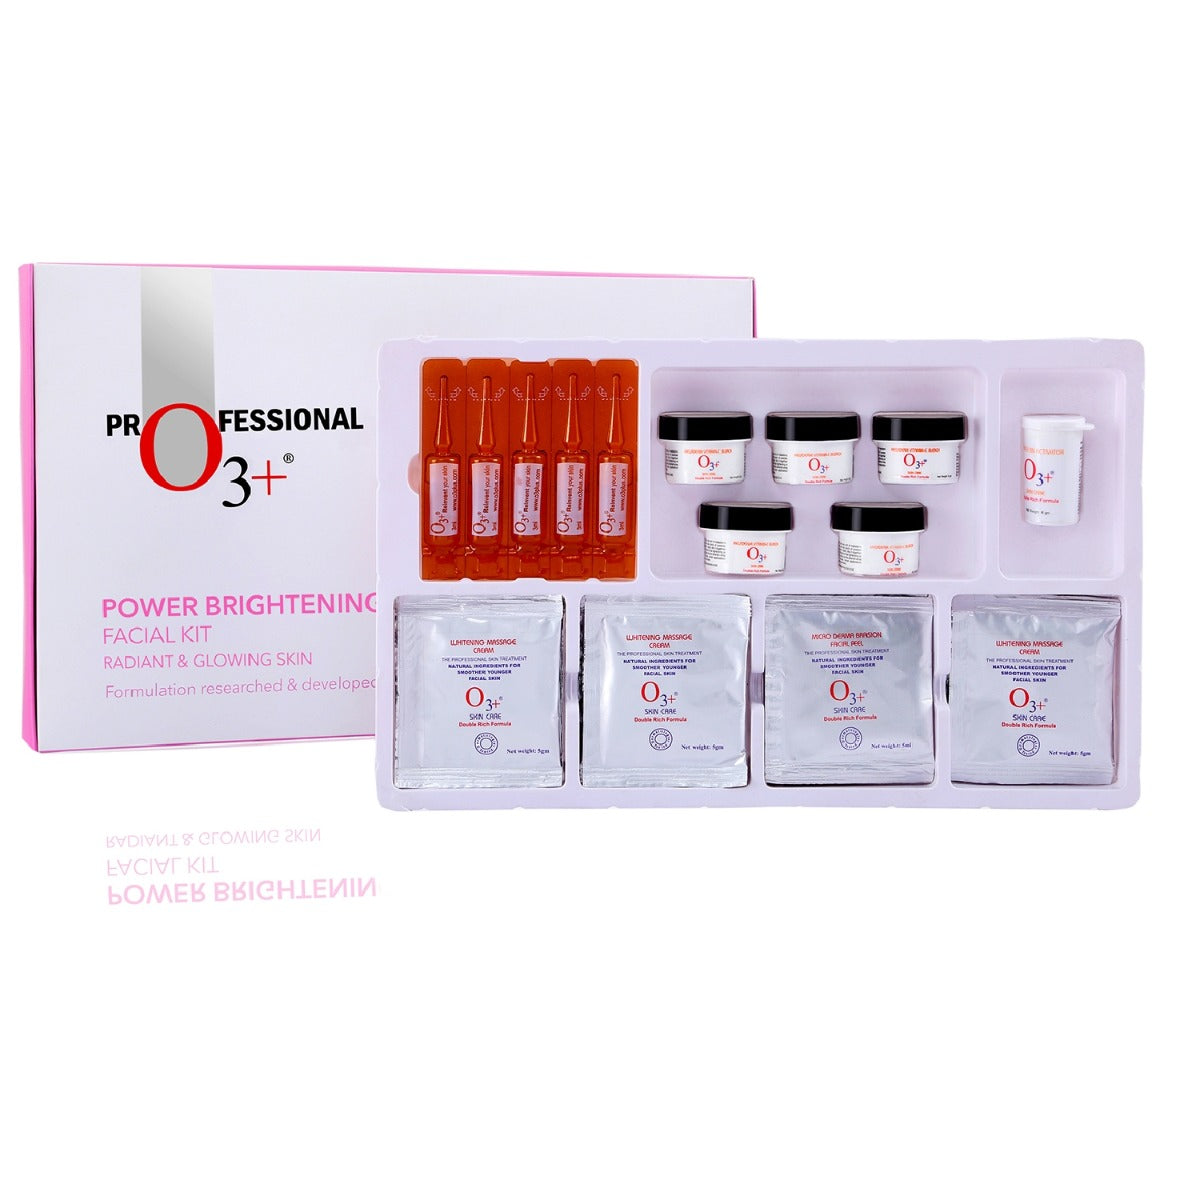 Power Brightening Facial Kit for Dirt, Dust and Dead Skin (163gm)